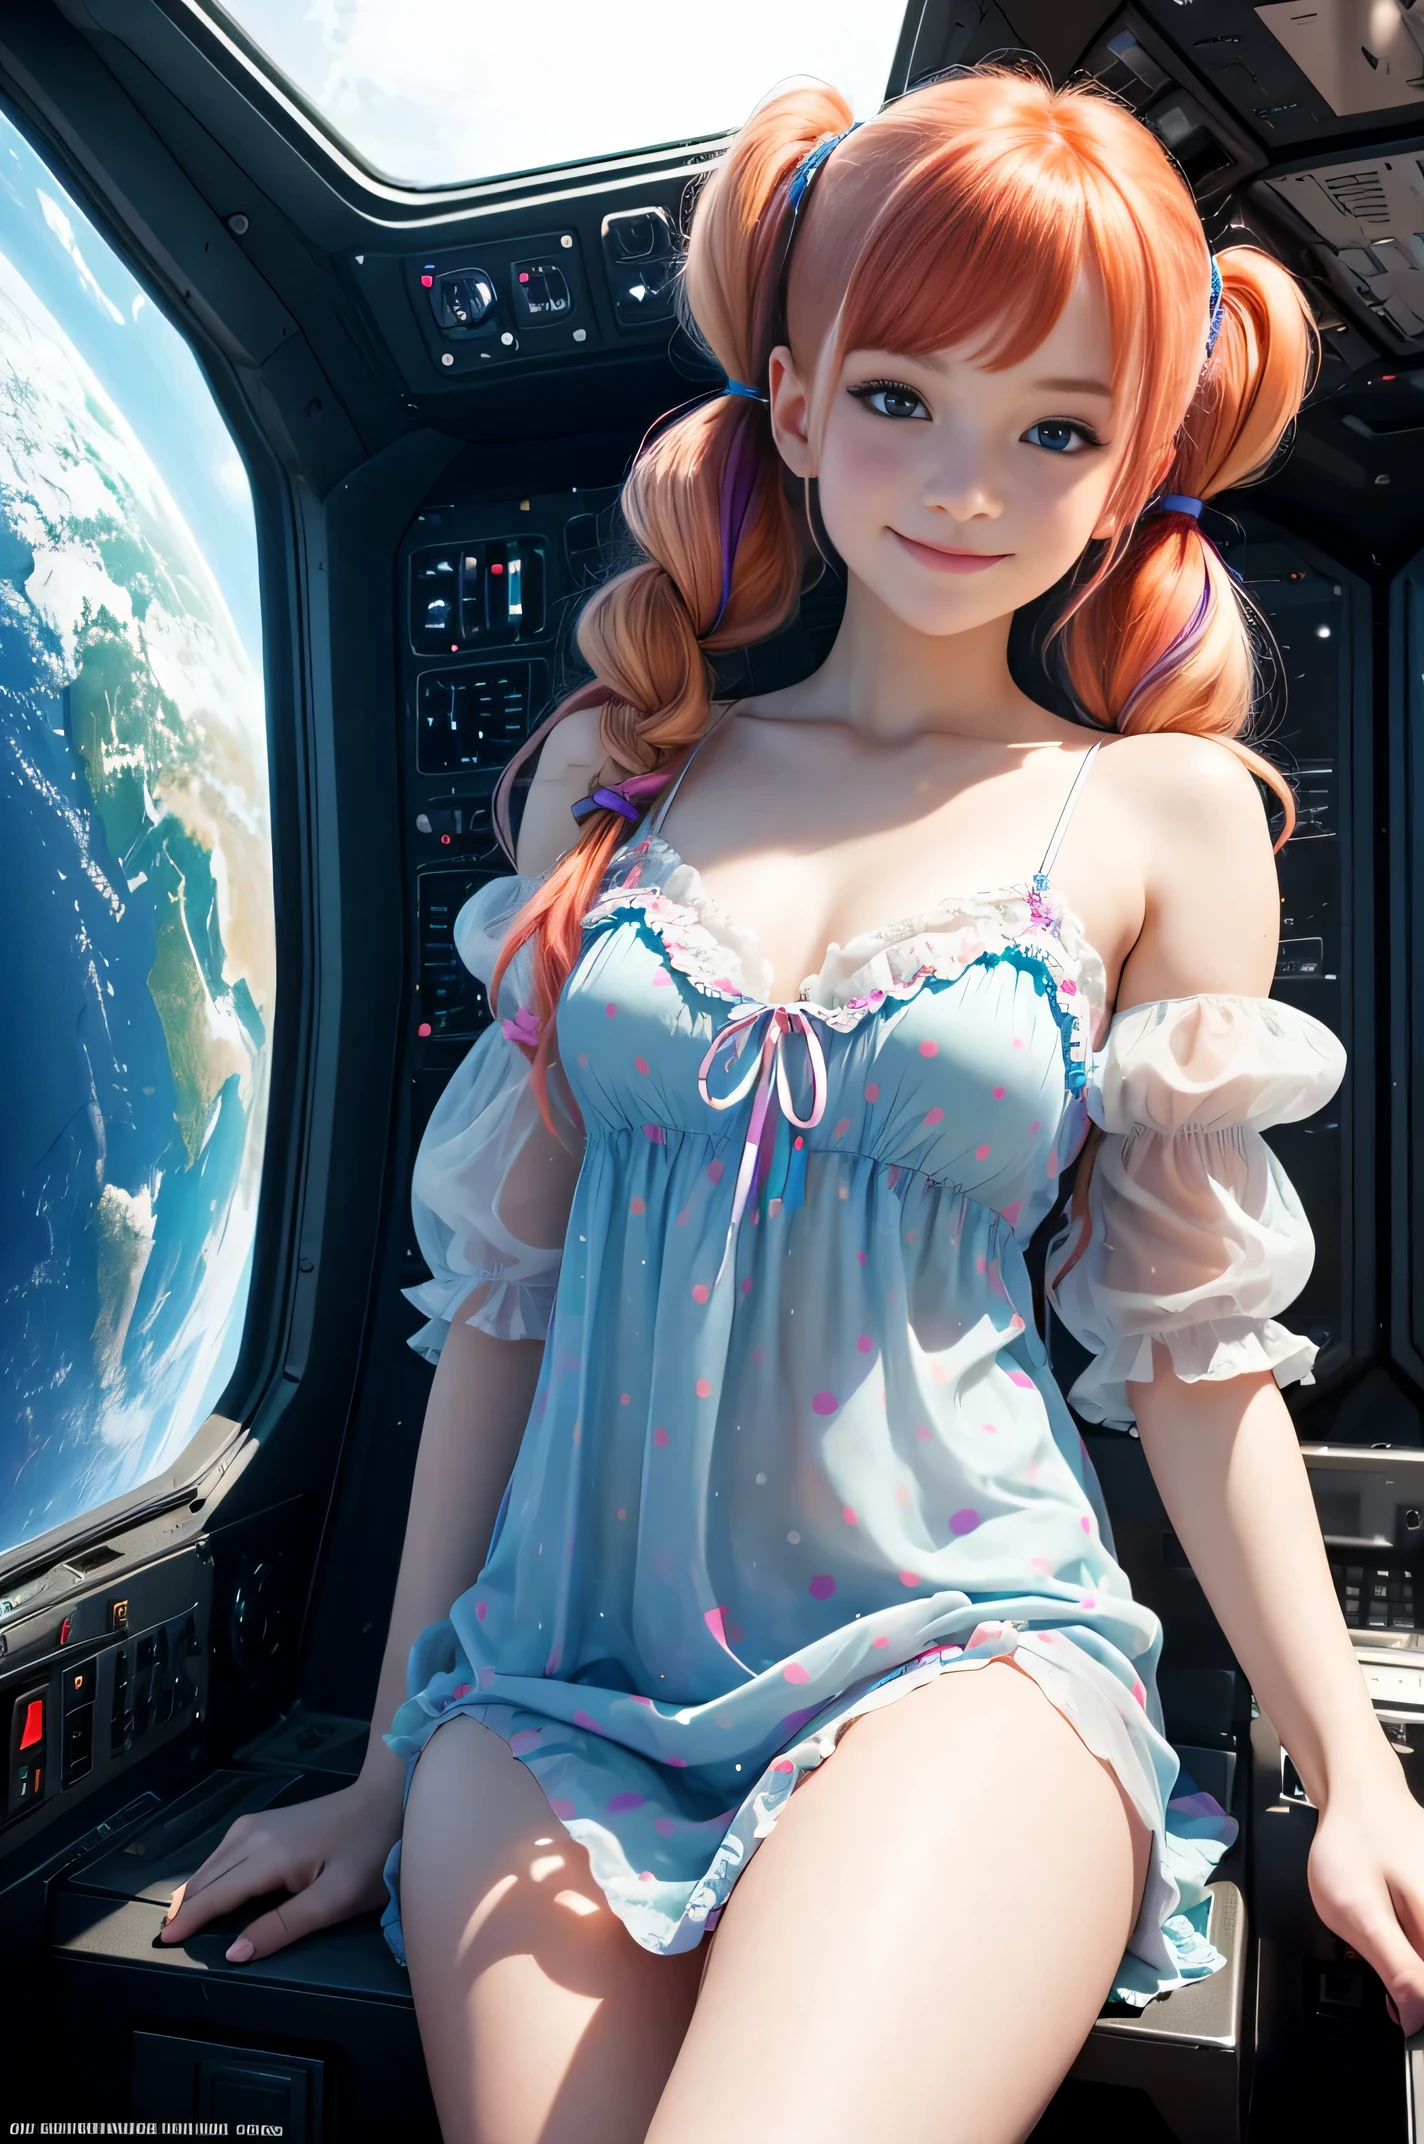 Best Quality, Masterpiece, 8k, RAW (overhead view) Cute redhead with rainbow colored hair tips, ribbons in her hair, 18-year-old woman, happy, smiling, in twin tails, perfect eyes, clear sparkling blue eyes, pale skin, silky smooth skin, flying a fancy metal luxurious space ship, futuristic cockpit, she's a pilot, outer space seen in windows, dark warm lighting, wearing a sheer, see though, pleated (chemise) nightgown (pastel rainbow colors, and polka dots), puffy sleeves.